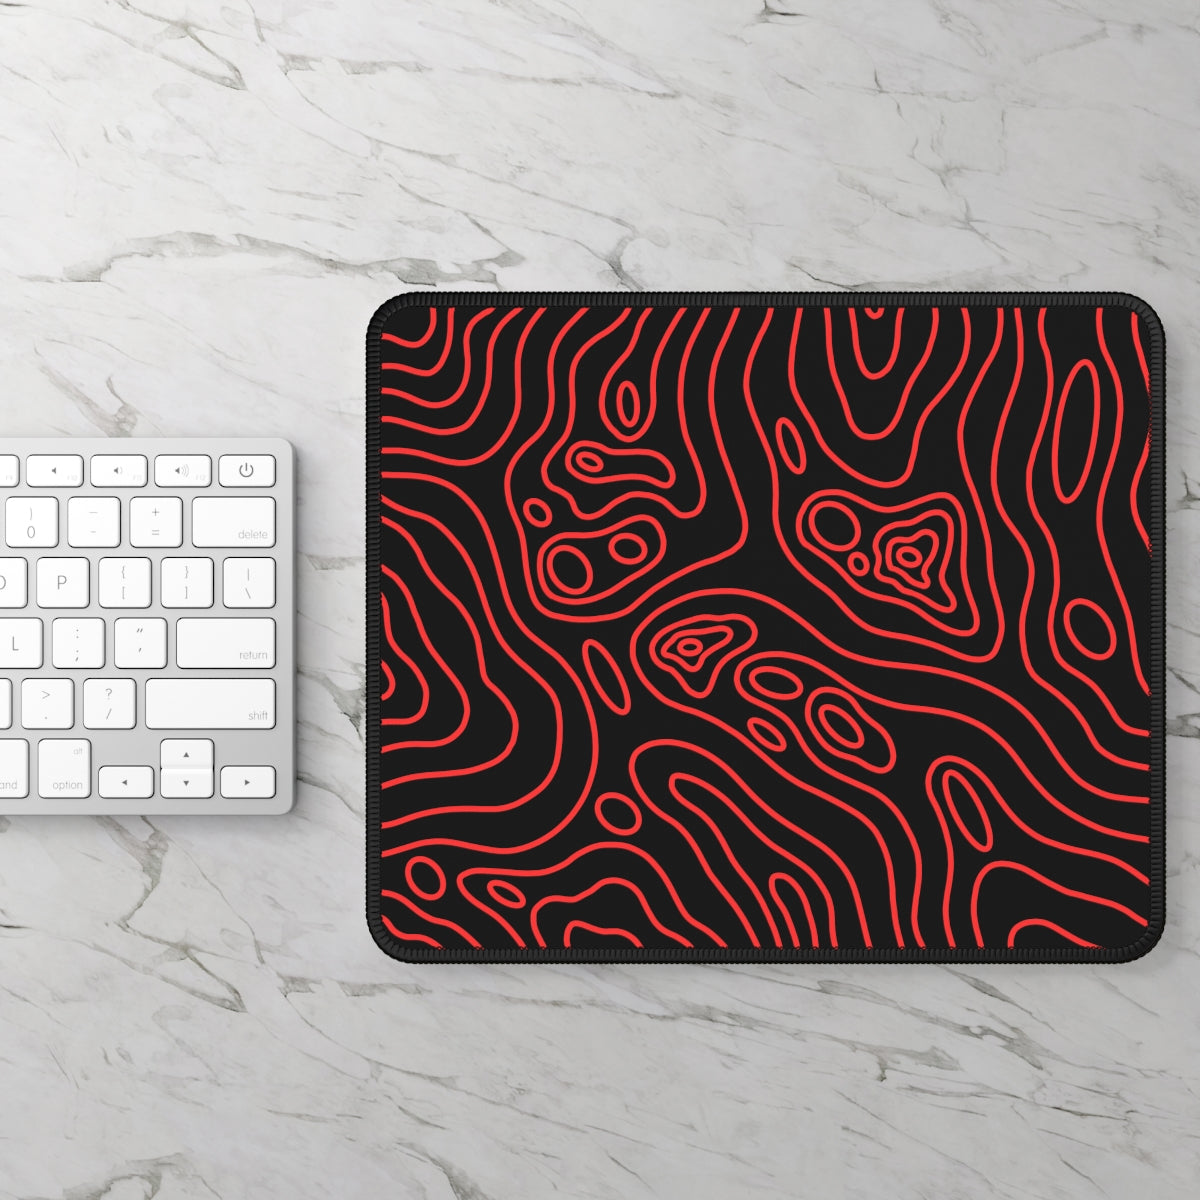 Black & Topographic Gaming Mouse Pad - Desk Cookies